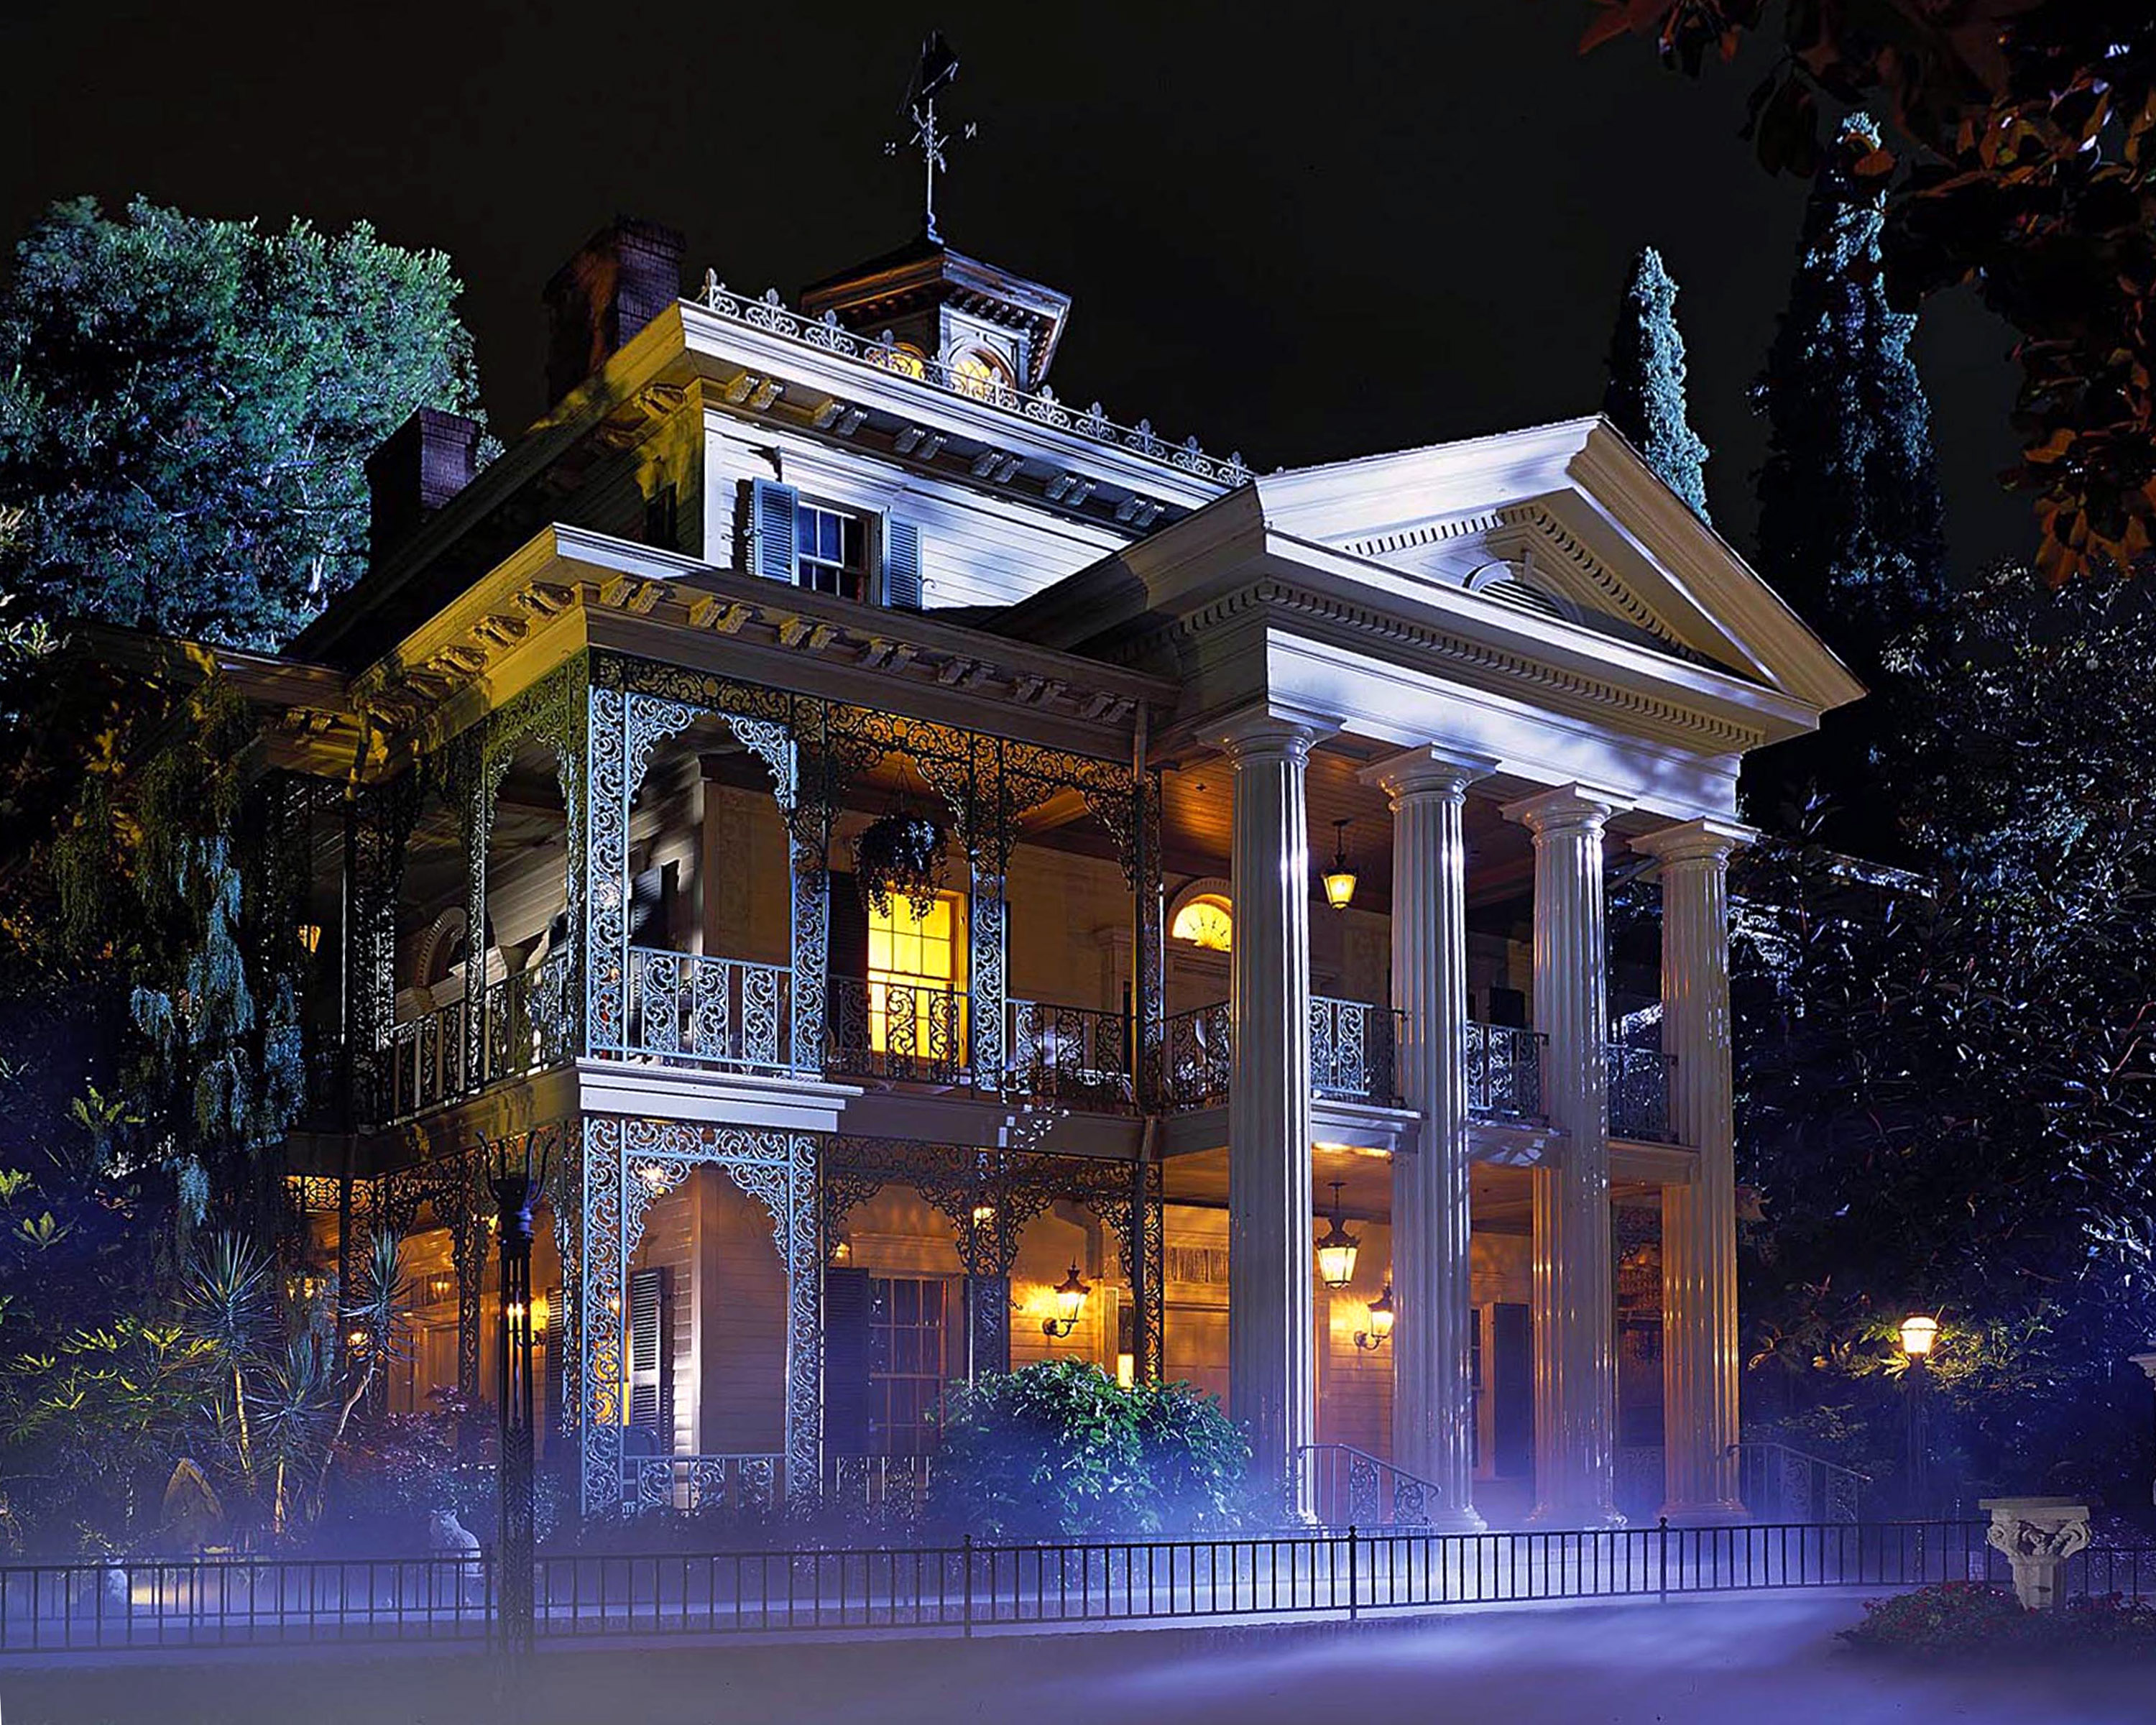 Haunted Mansion Animated Tv Special Announced For Disney Channel